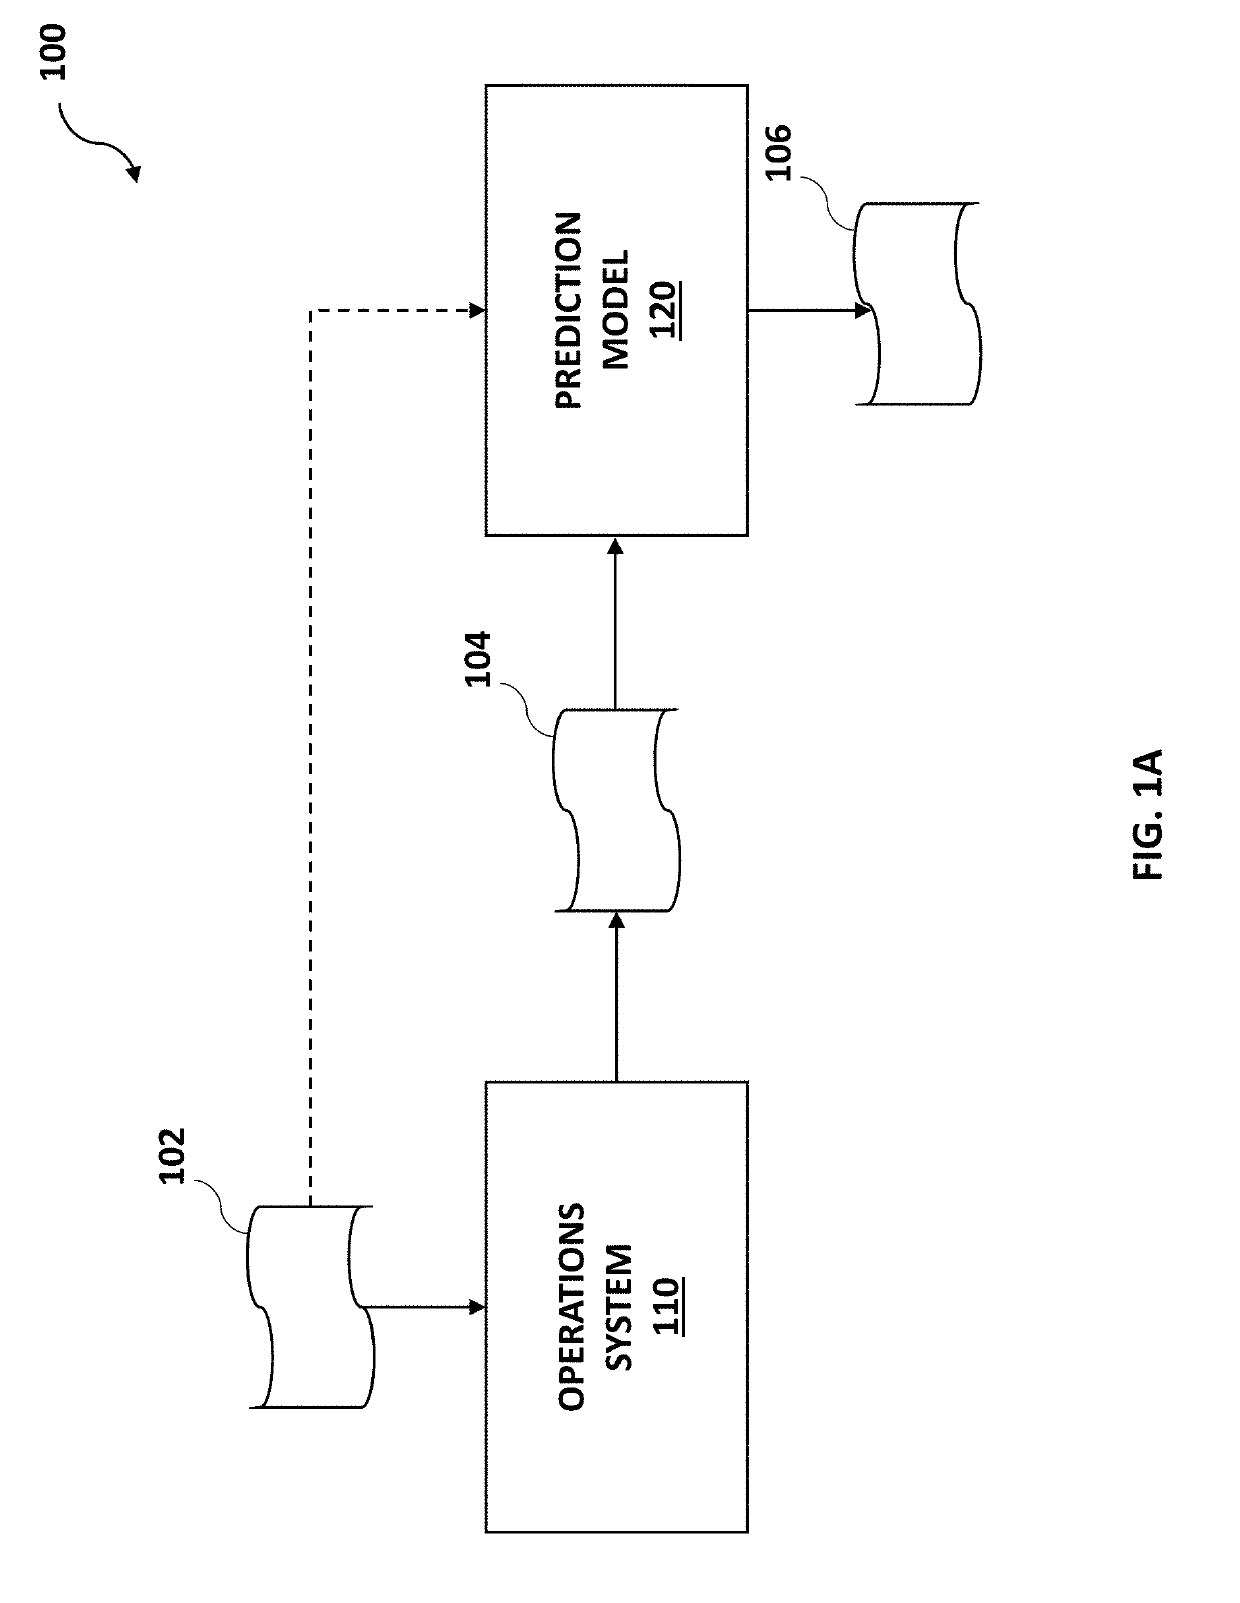 System and method for noise-based training of a prediction model